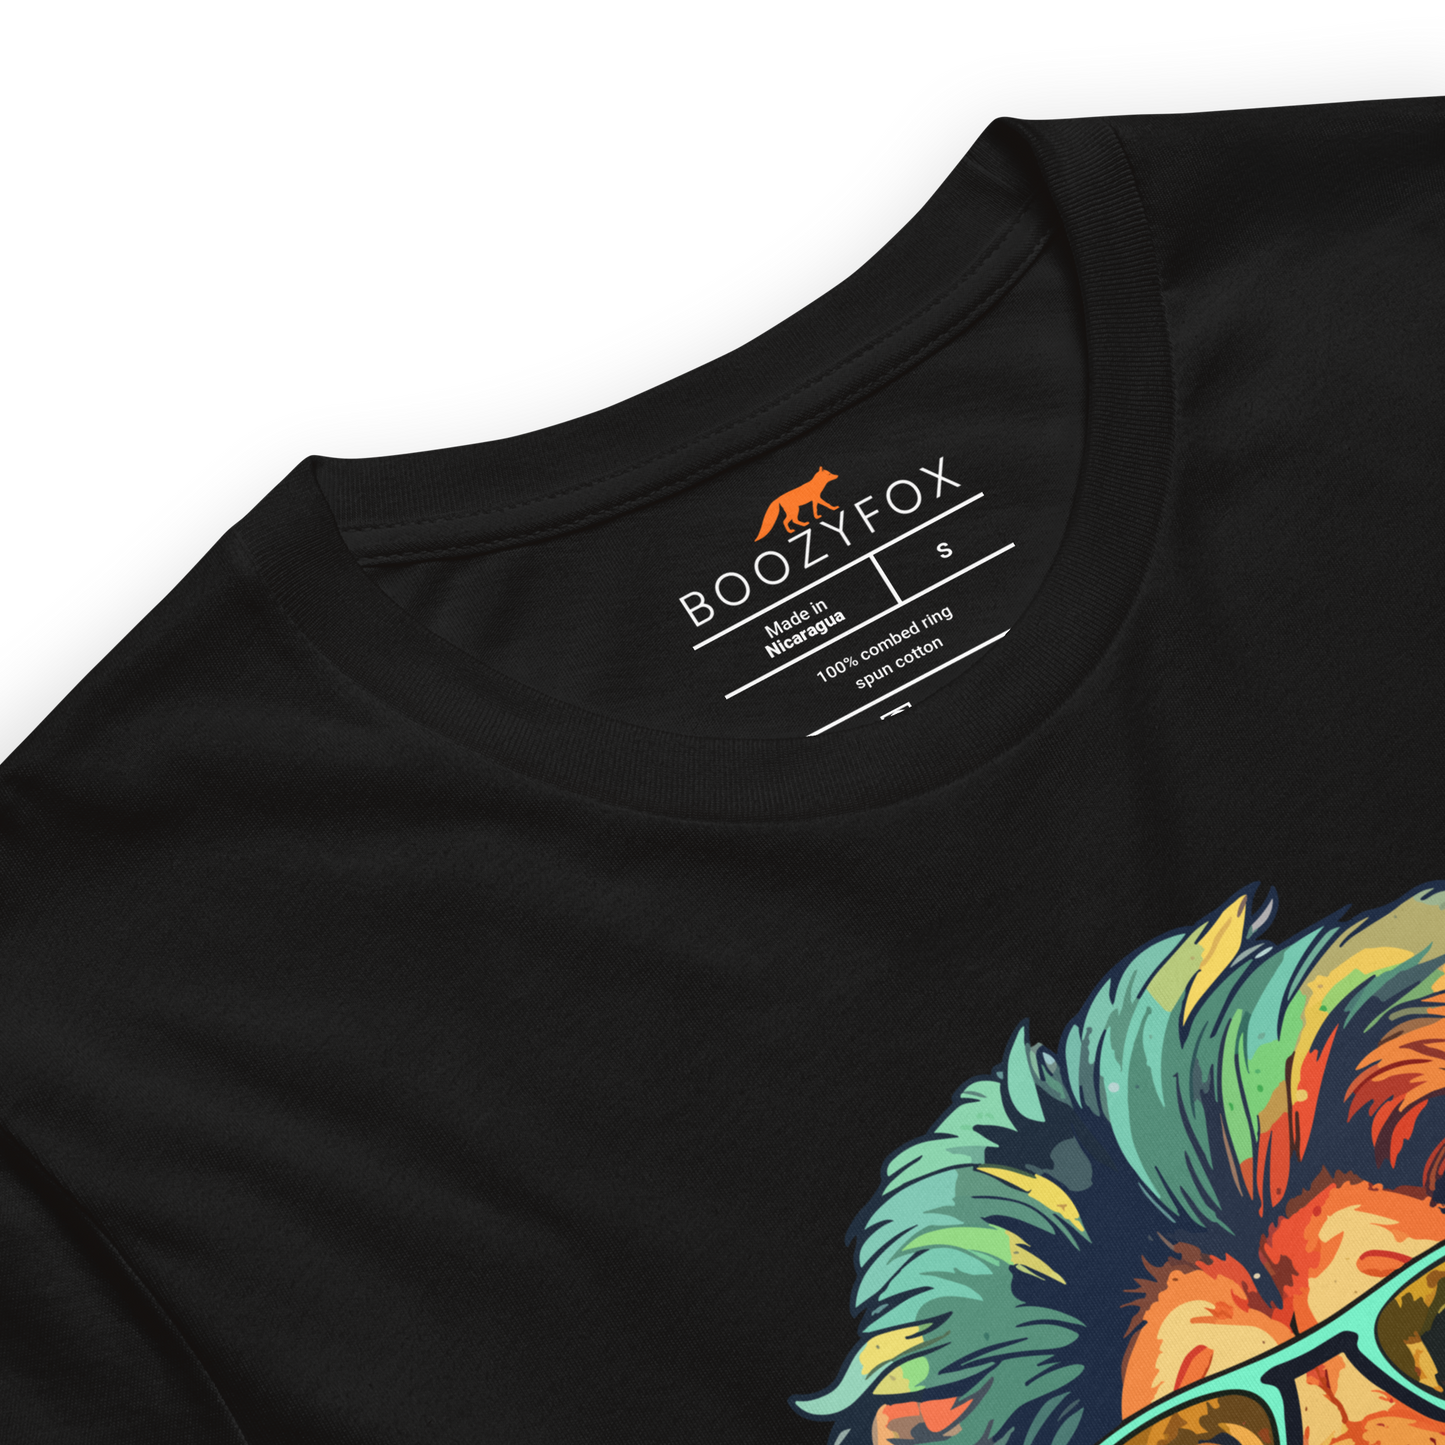 Product details of a Black Premium Lion T-Shirt featuring a captivating Rebel Lion graphic on the chest - Funny Graphic Lion Tees - Boozy Fox